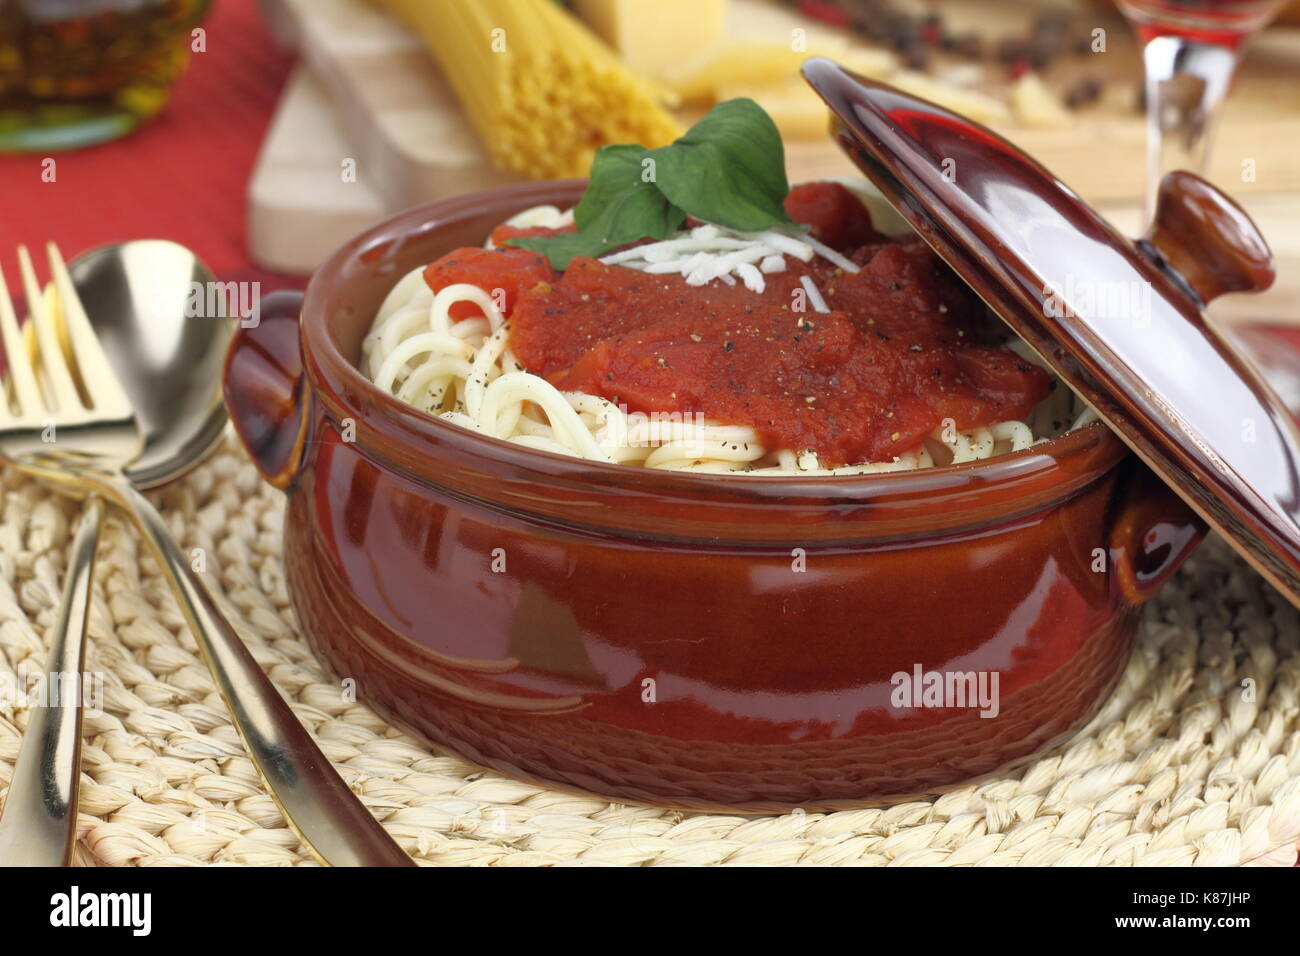 Spaghetti pasta with tomato sauce, cheese and basil in a clay pot Stock Photo